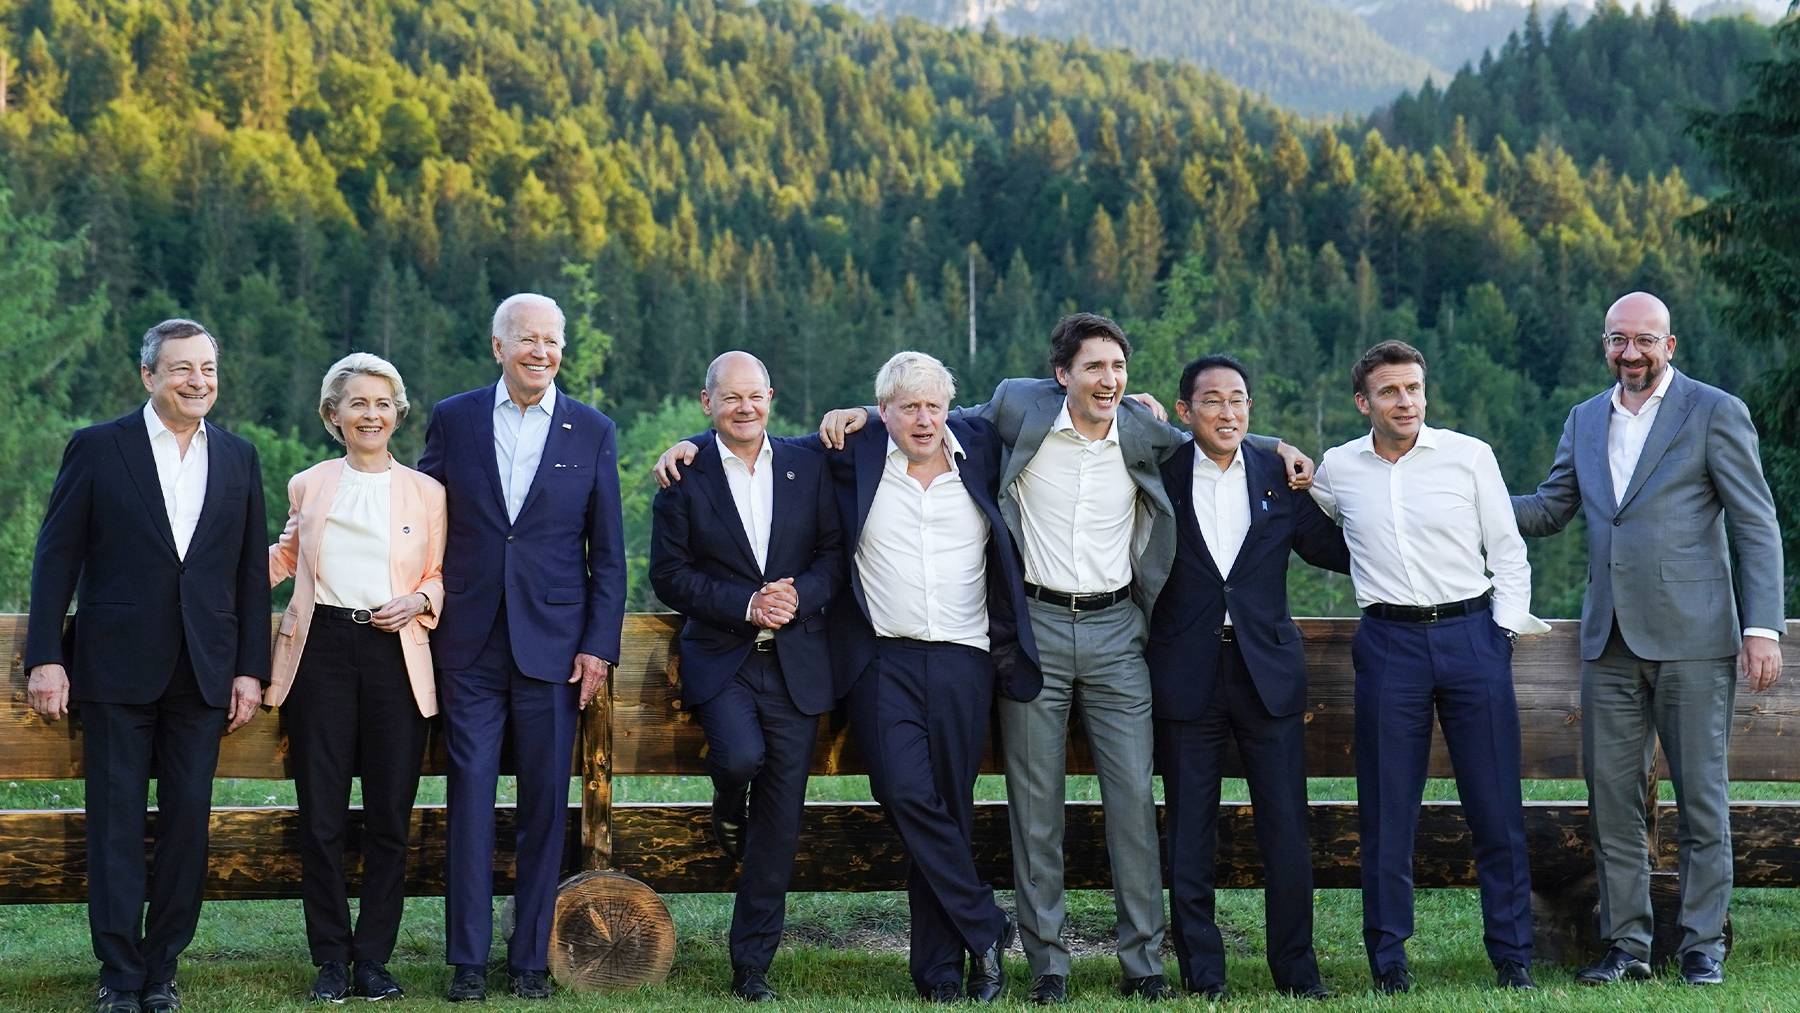 Presidents and prime ministers from the US, Italy, Japan, France, Germany, the UK and the European Union gathered in Bavaria, Germany for the G7 Summit.